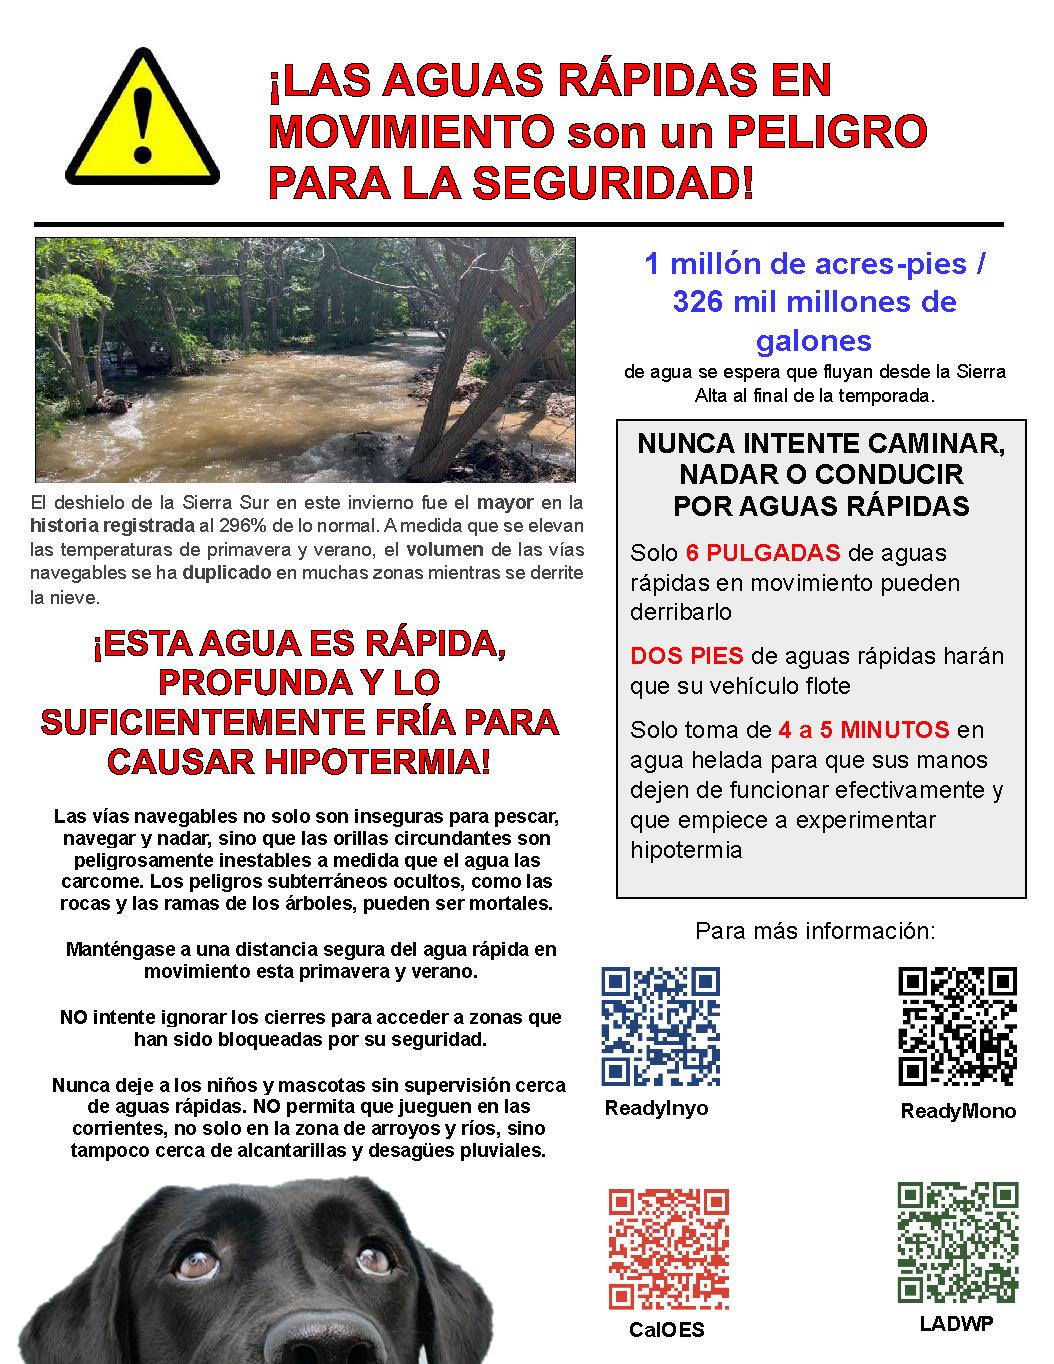 Image of alert flyer in Spanish warning and caution when near cold swift water streams, creeks, rivers